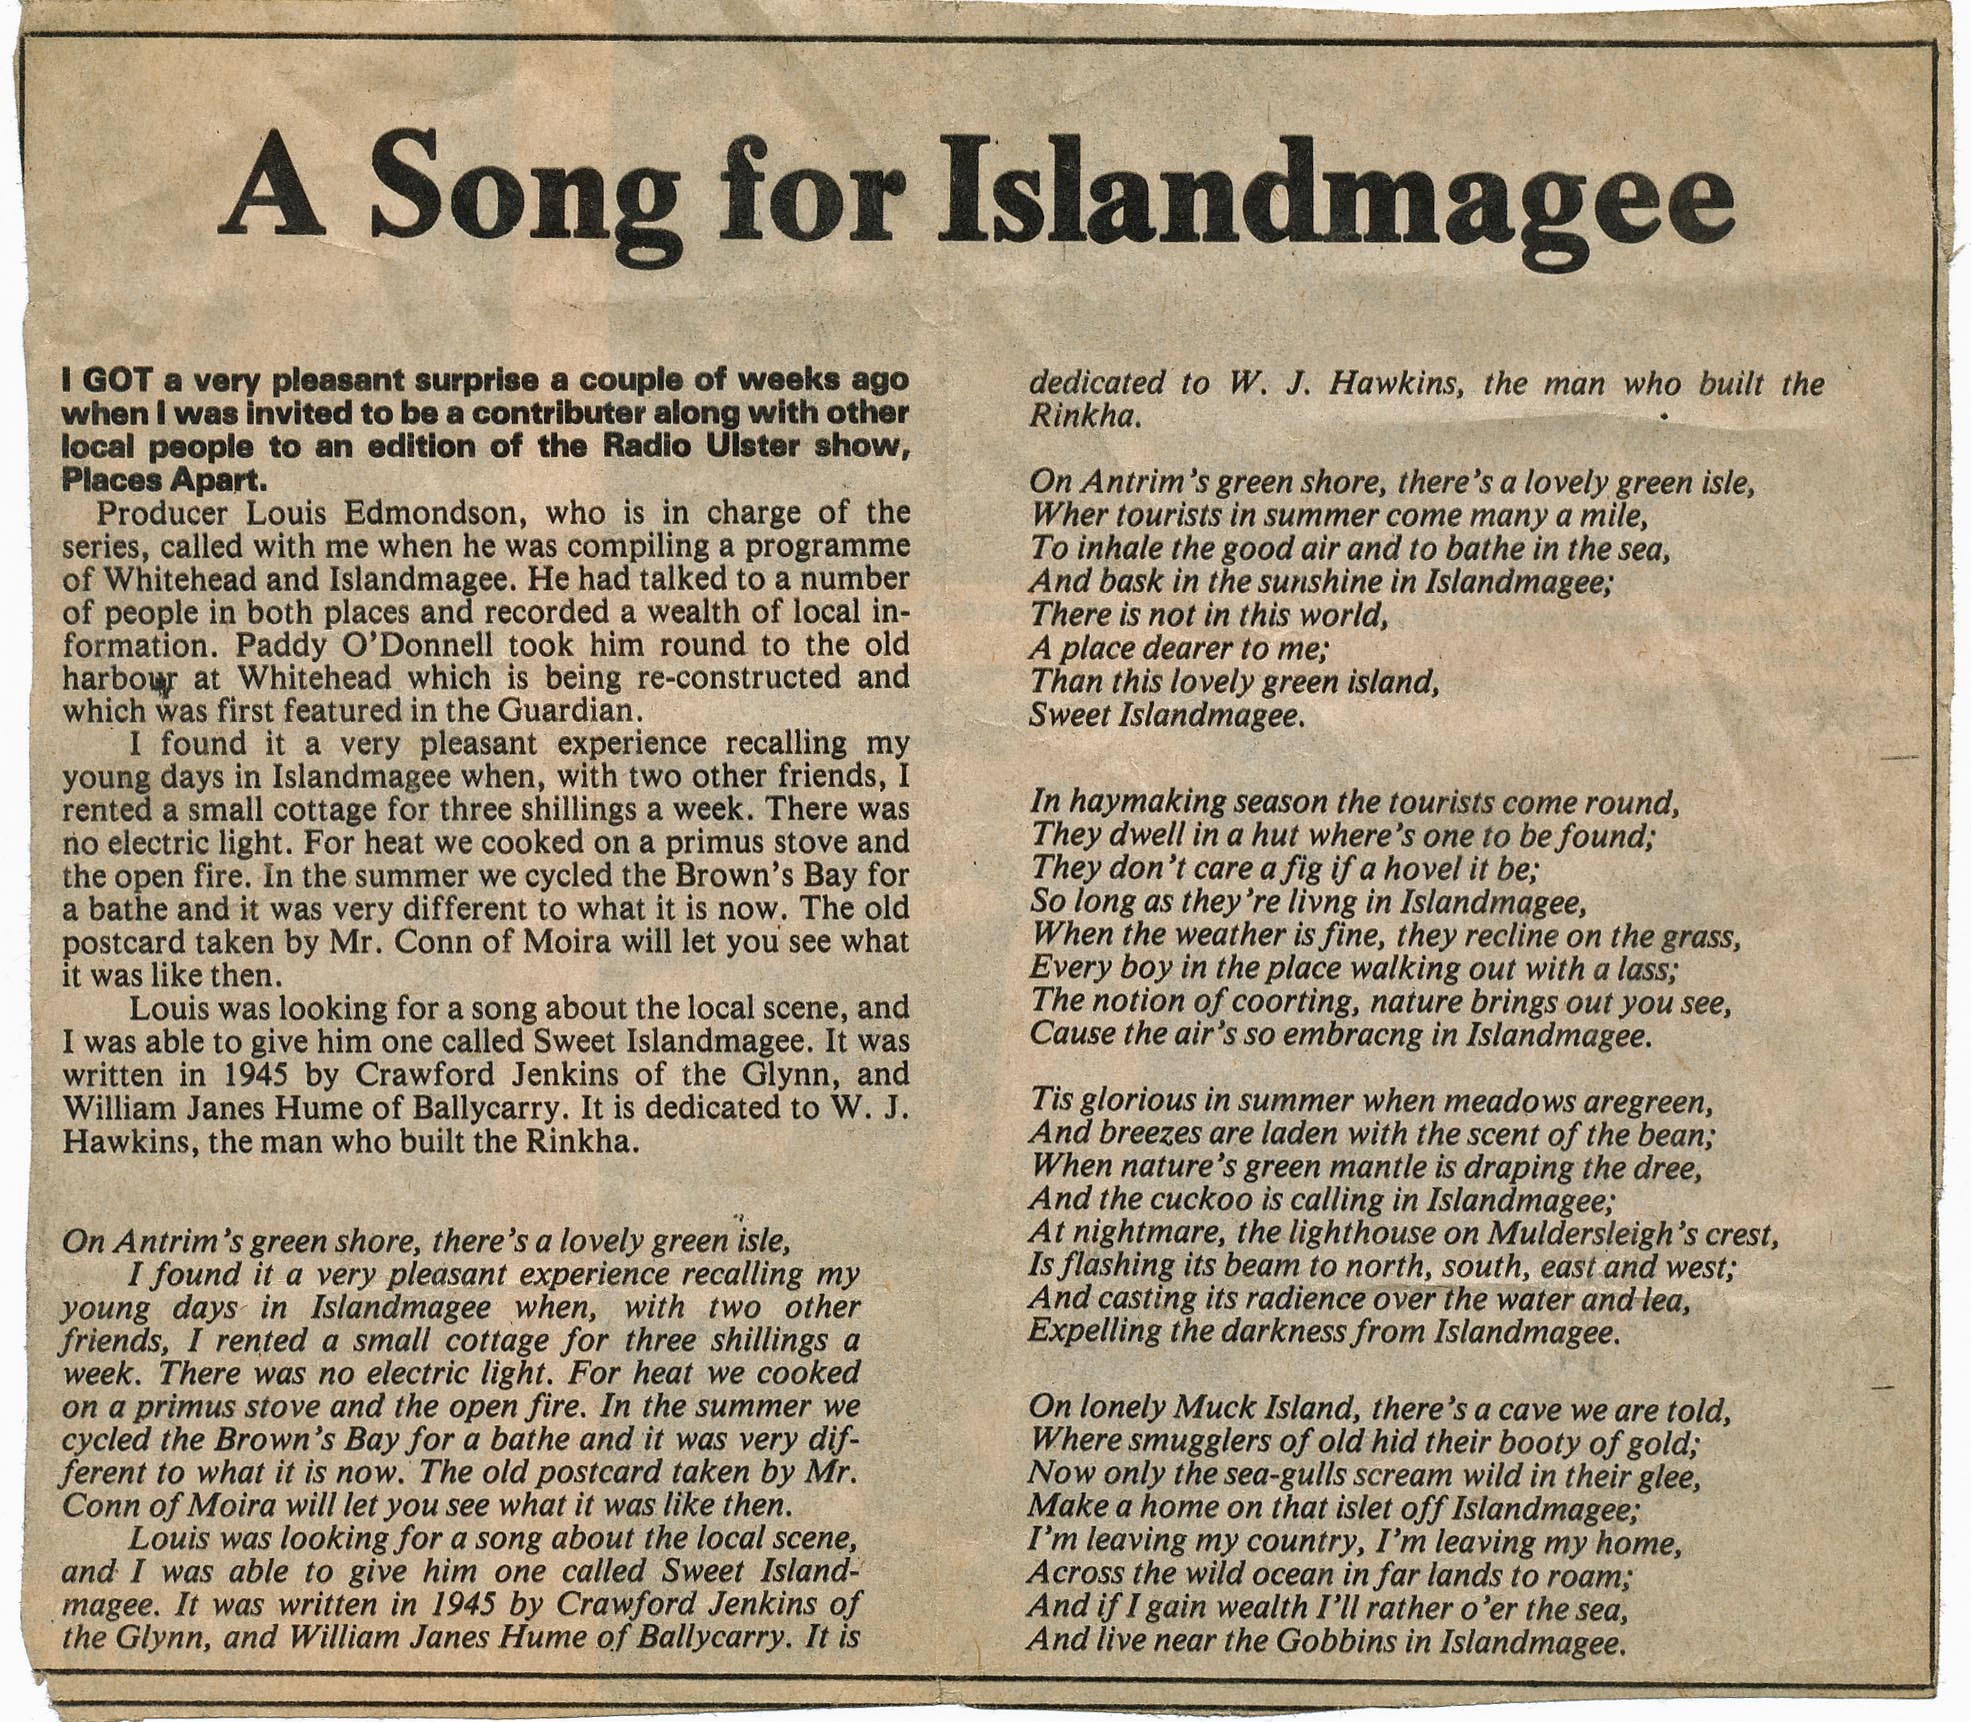 Song for Islandmagee